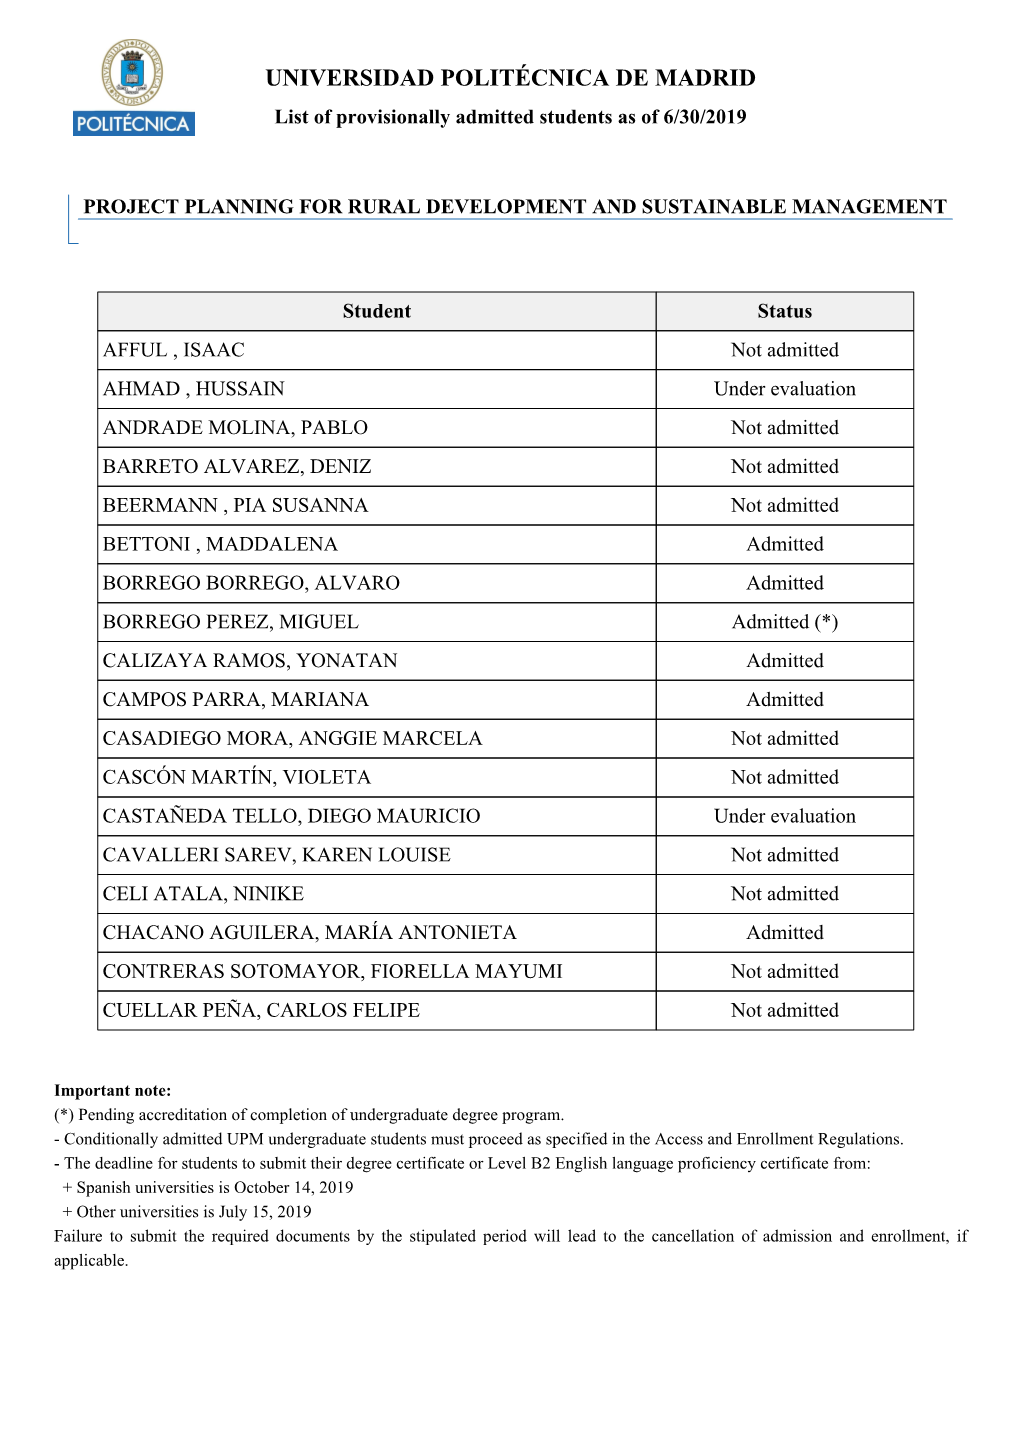 UNIVERSIDAD POLITÉCNICA DE MADRID List of Provisionally Admitted Students As of 6/30/2019